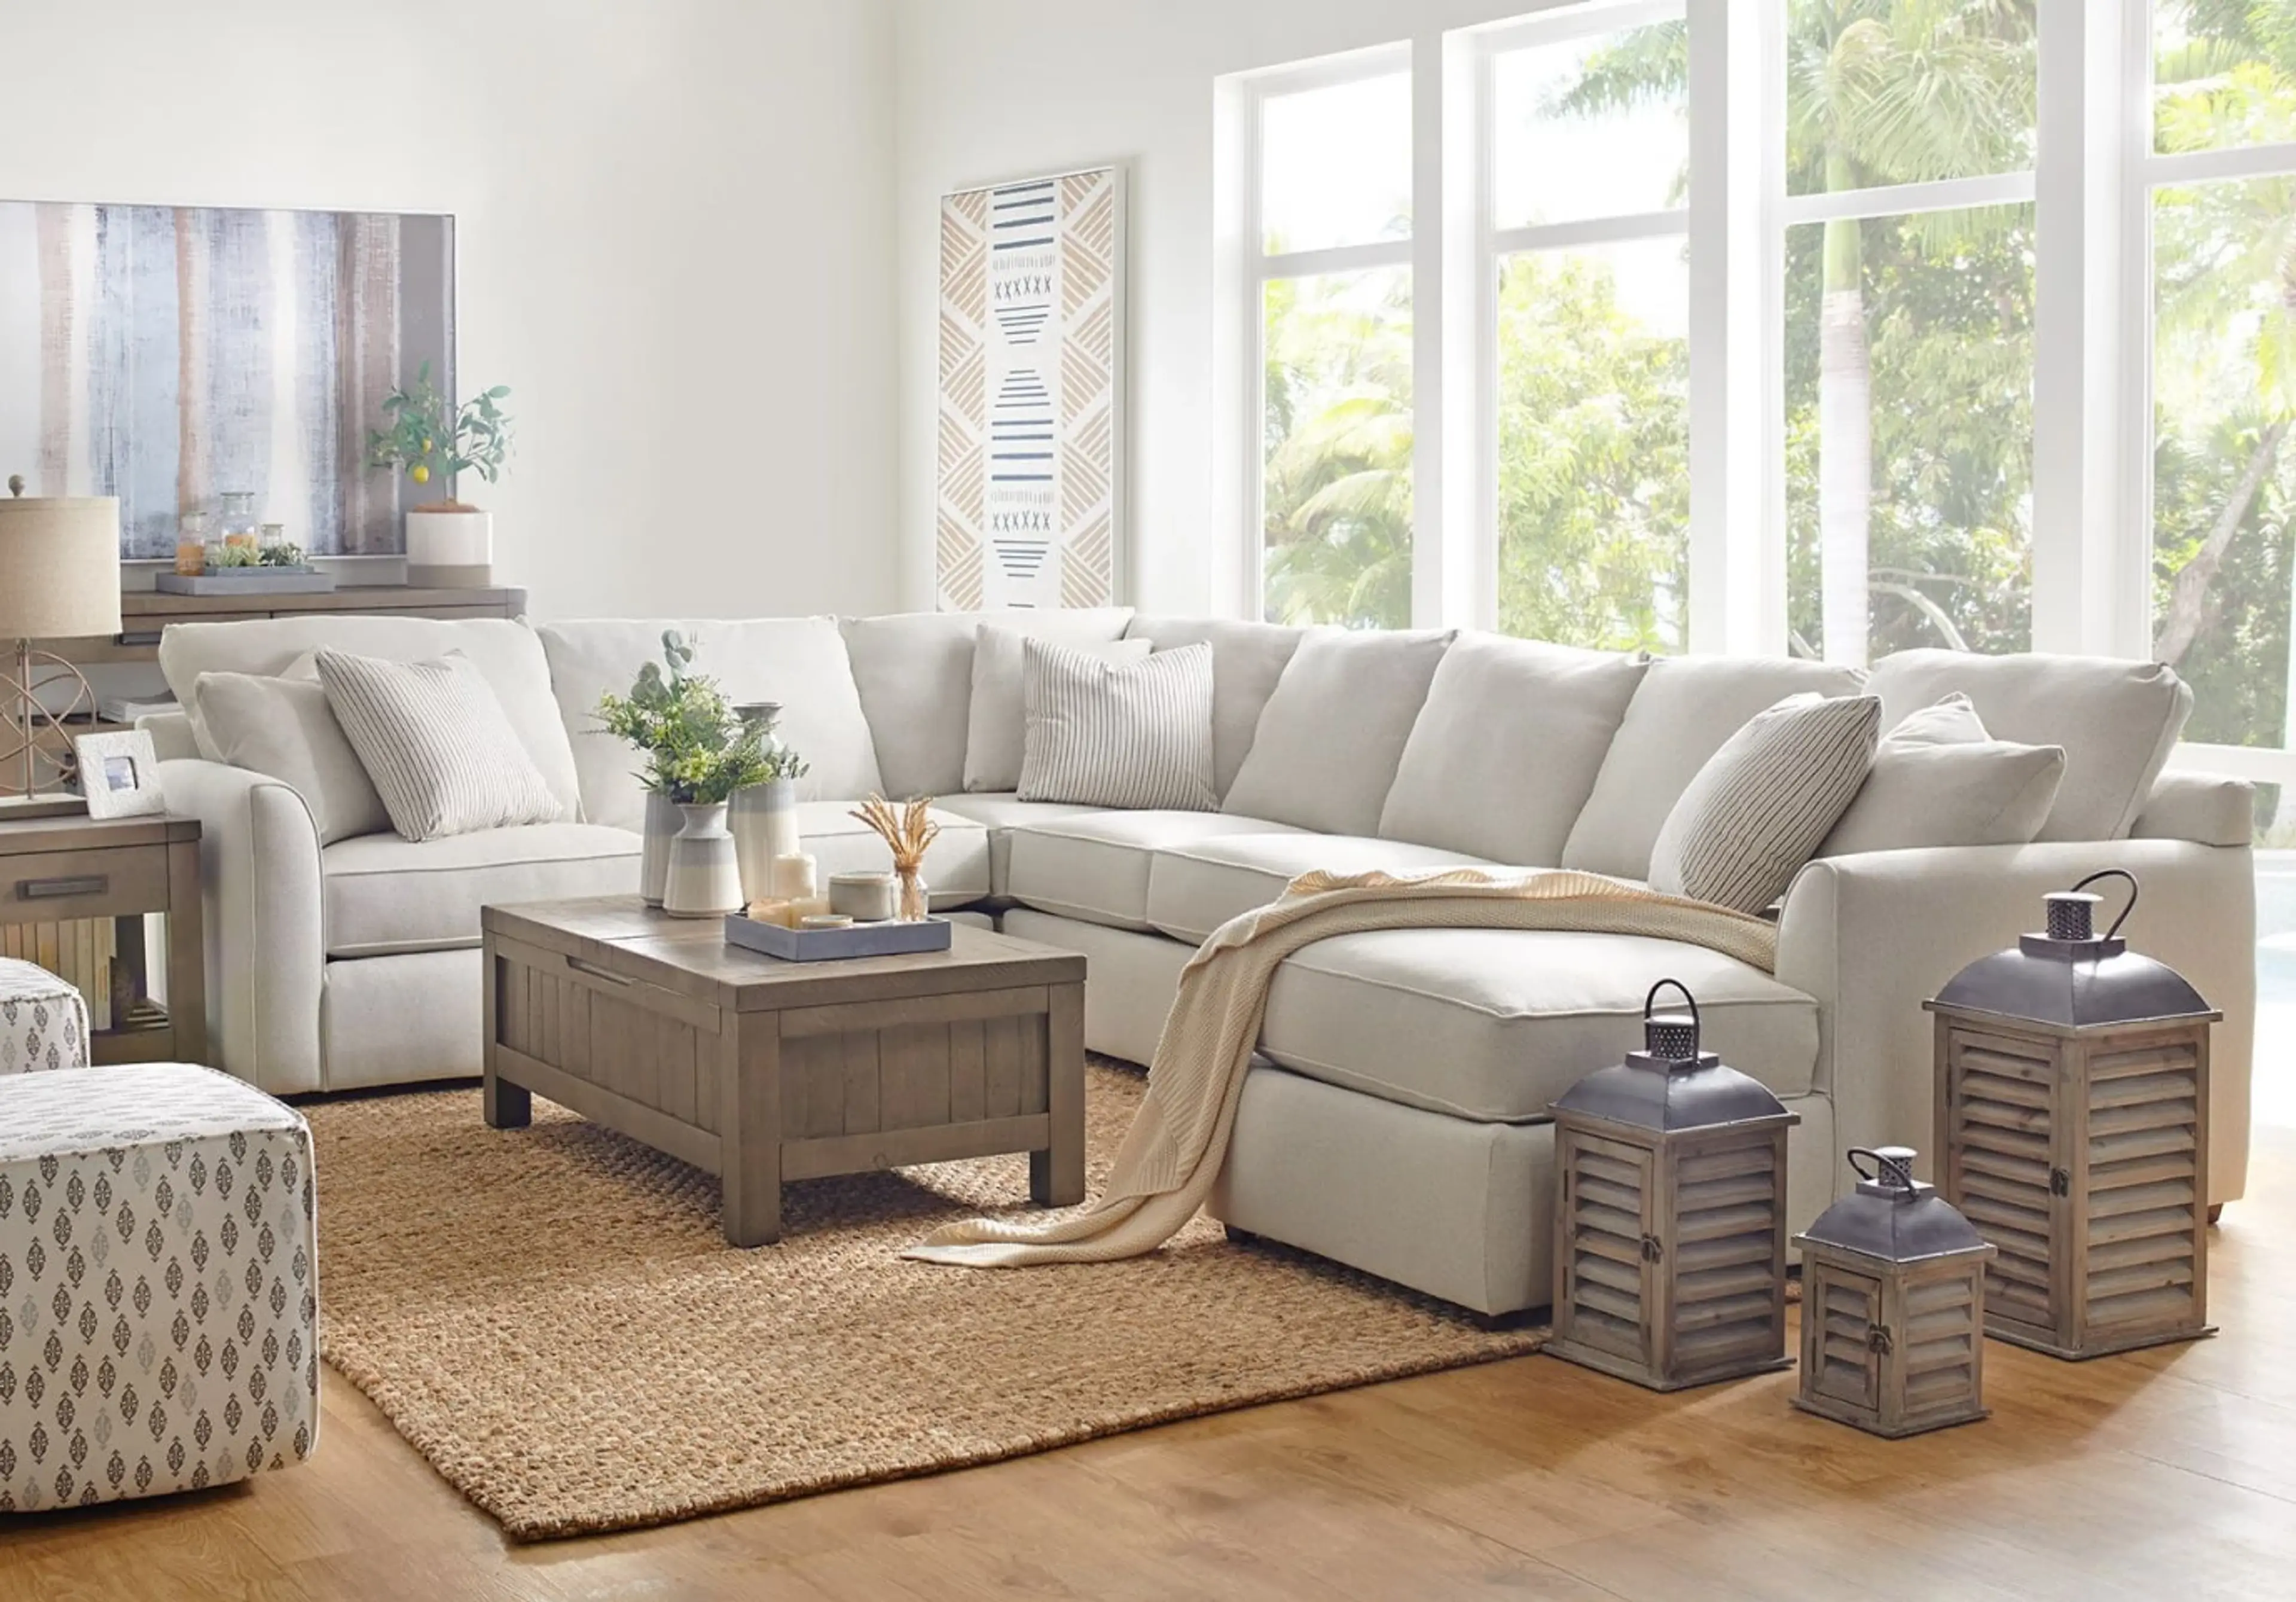 How to shop for a Sectional